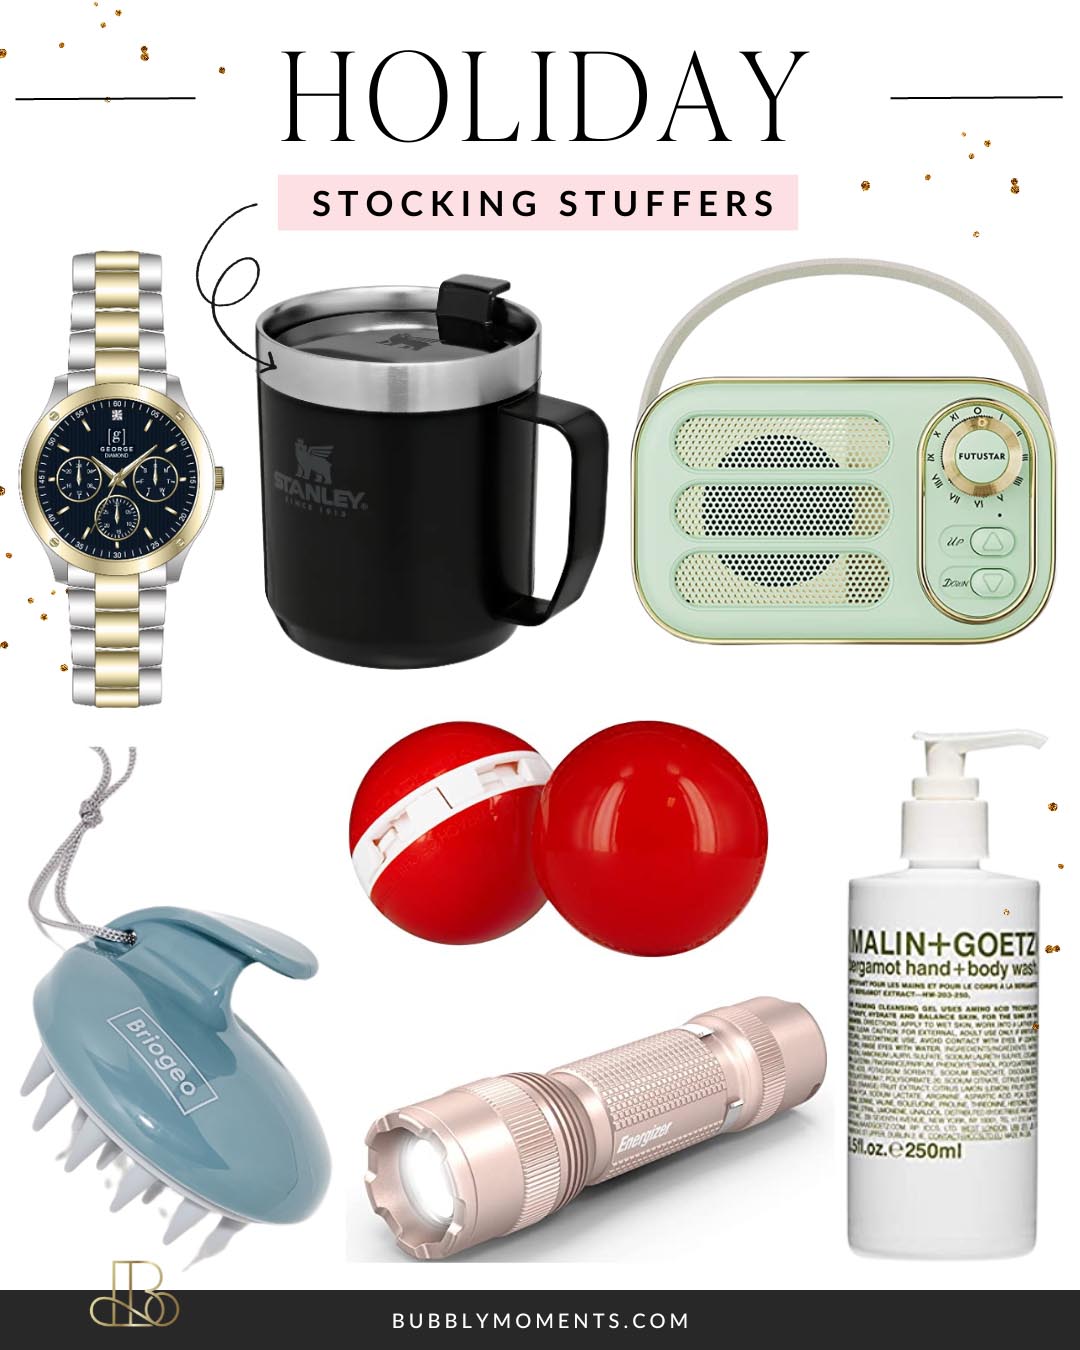 18 holiday gifts under $25: Stuff your stockings without going broke - CNET